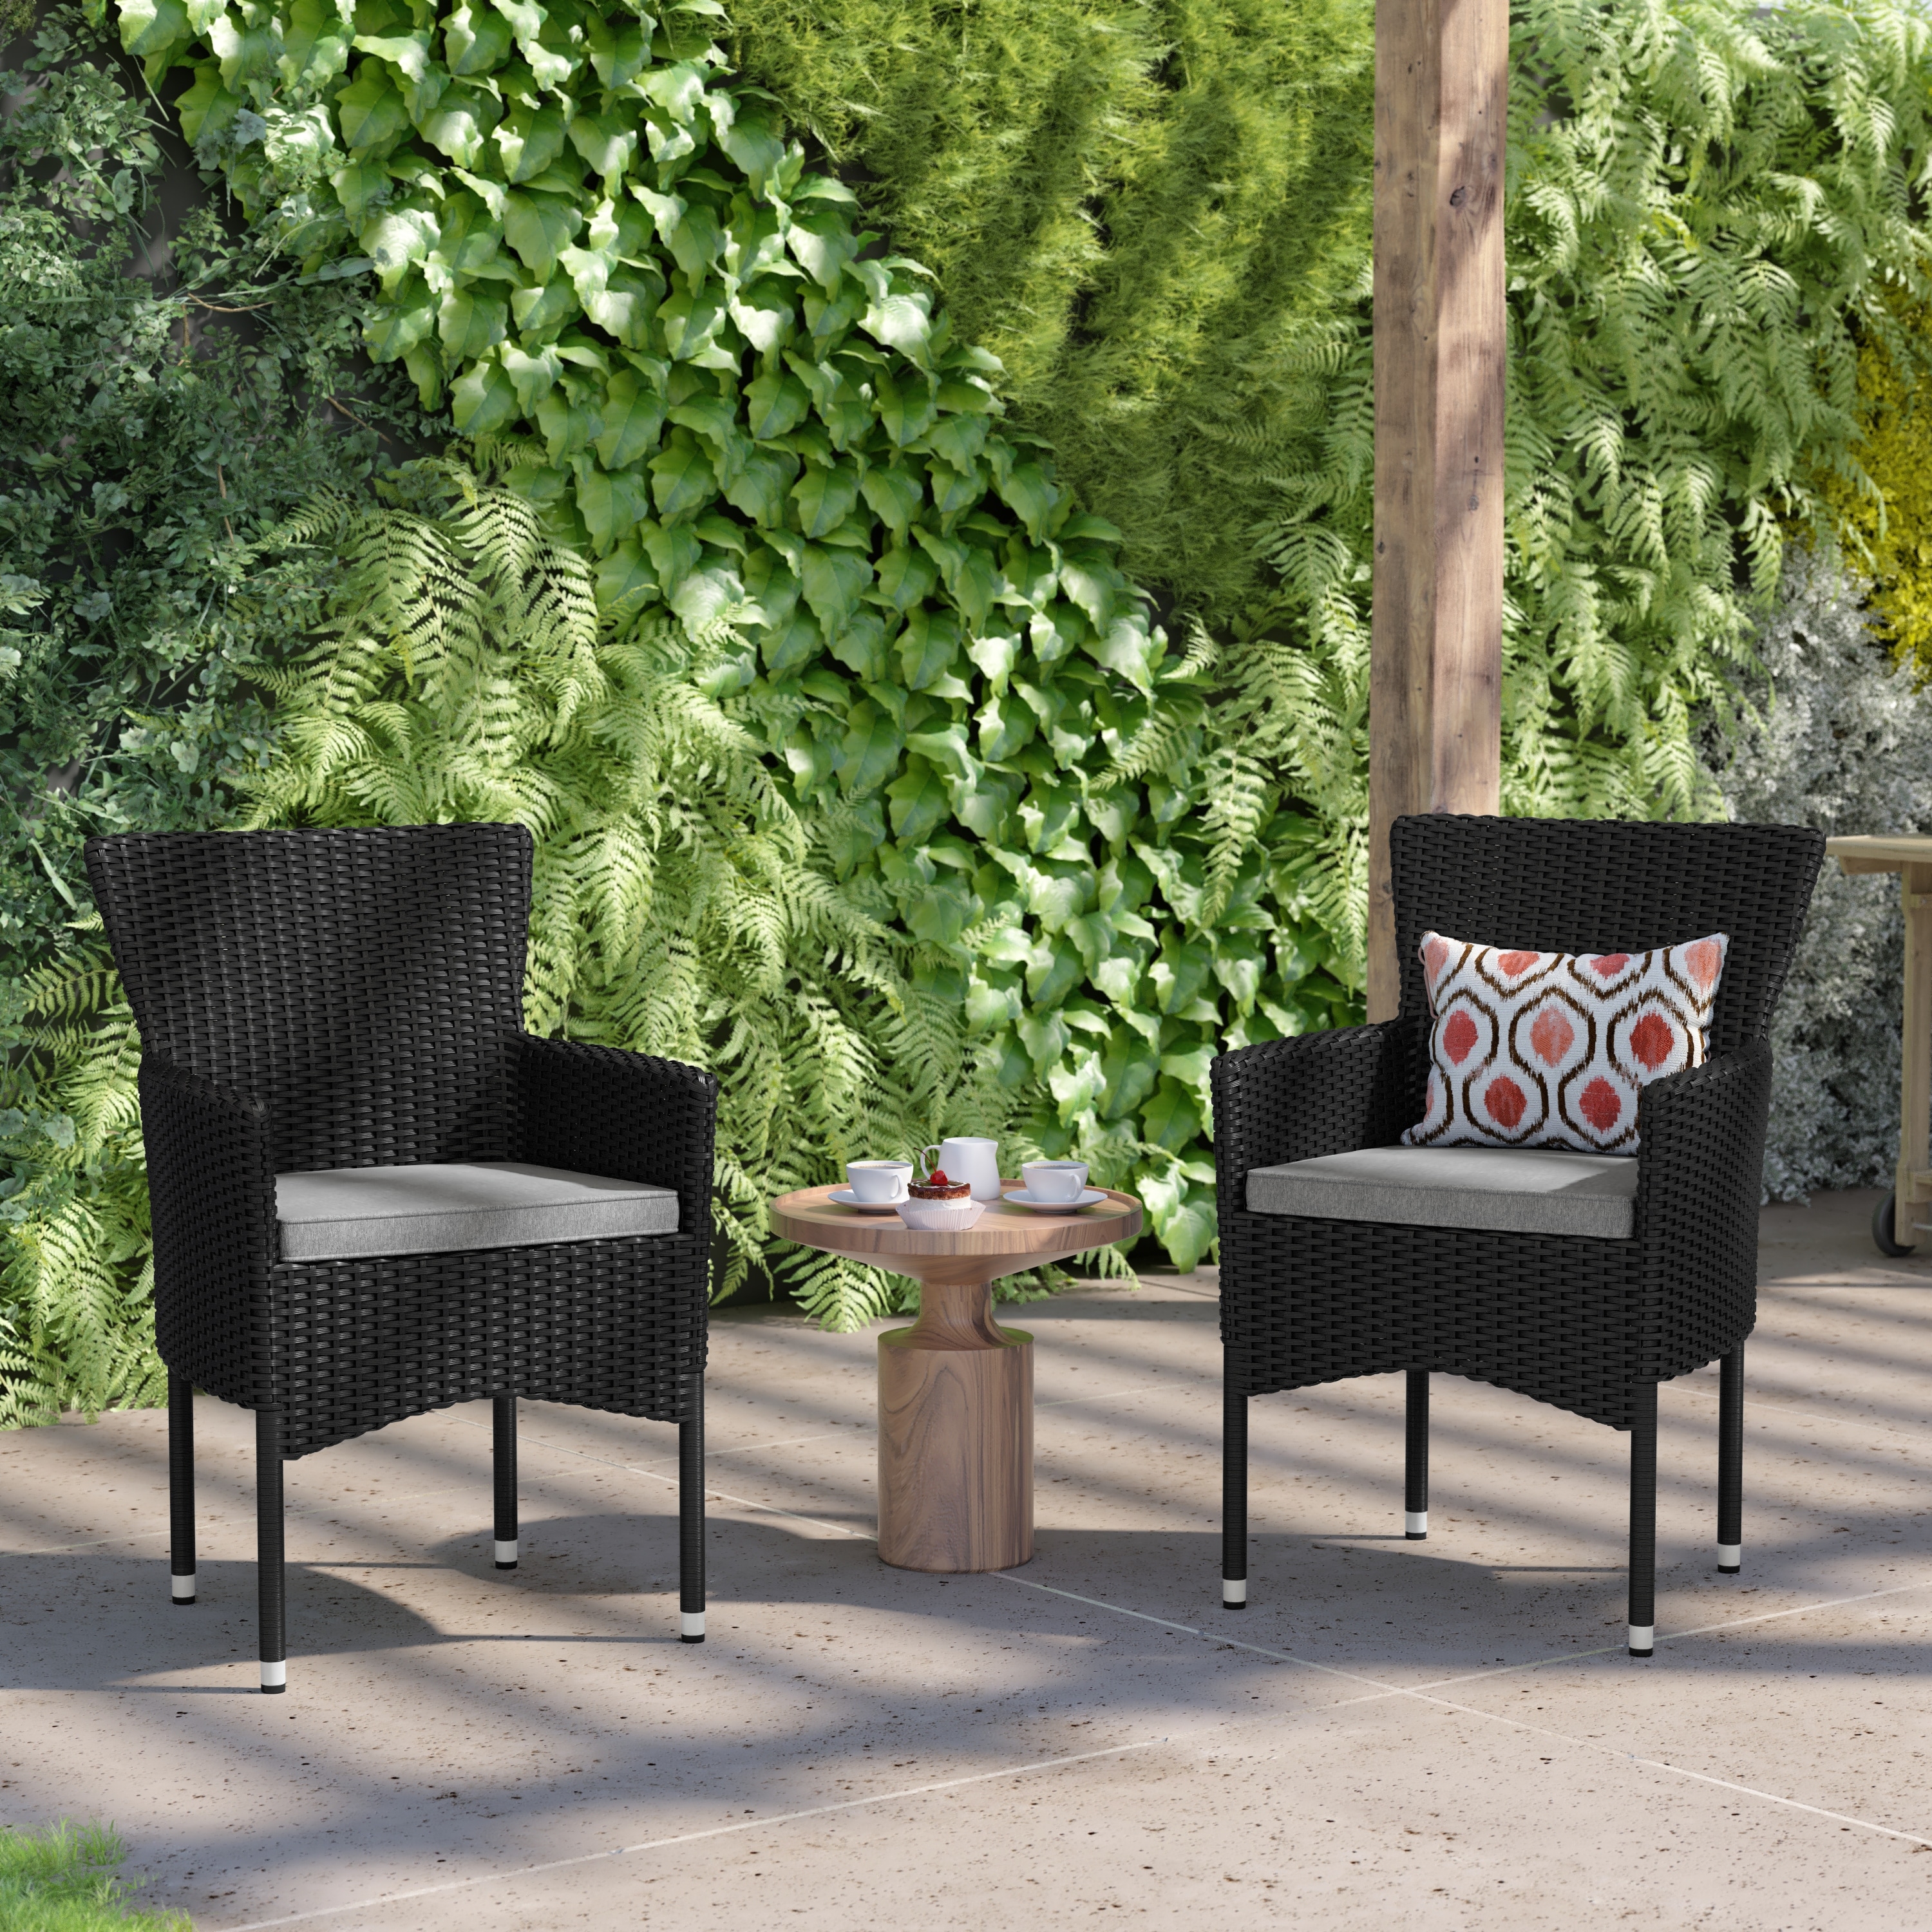 Indoor/outdoor Wicker Wrapped Steel Frame Patio Chairs and Cushions